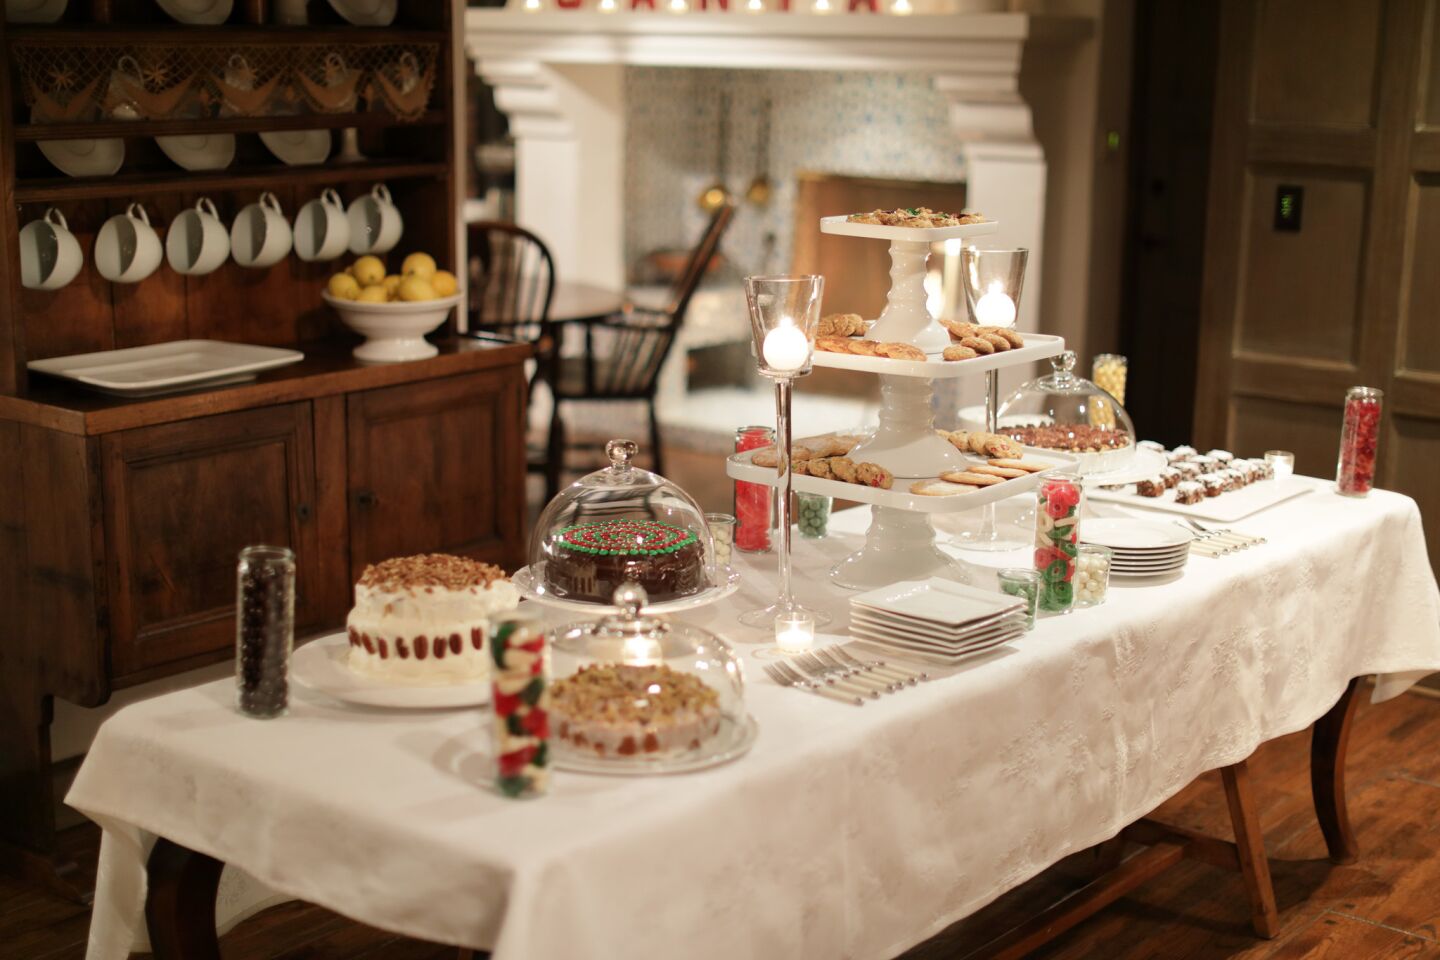 A dessert table holds sweets for post-Christmas Eve family dinner.